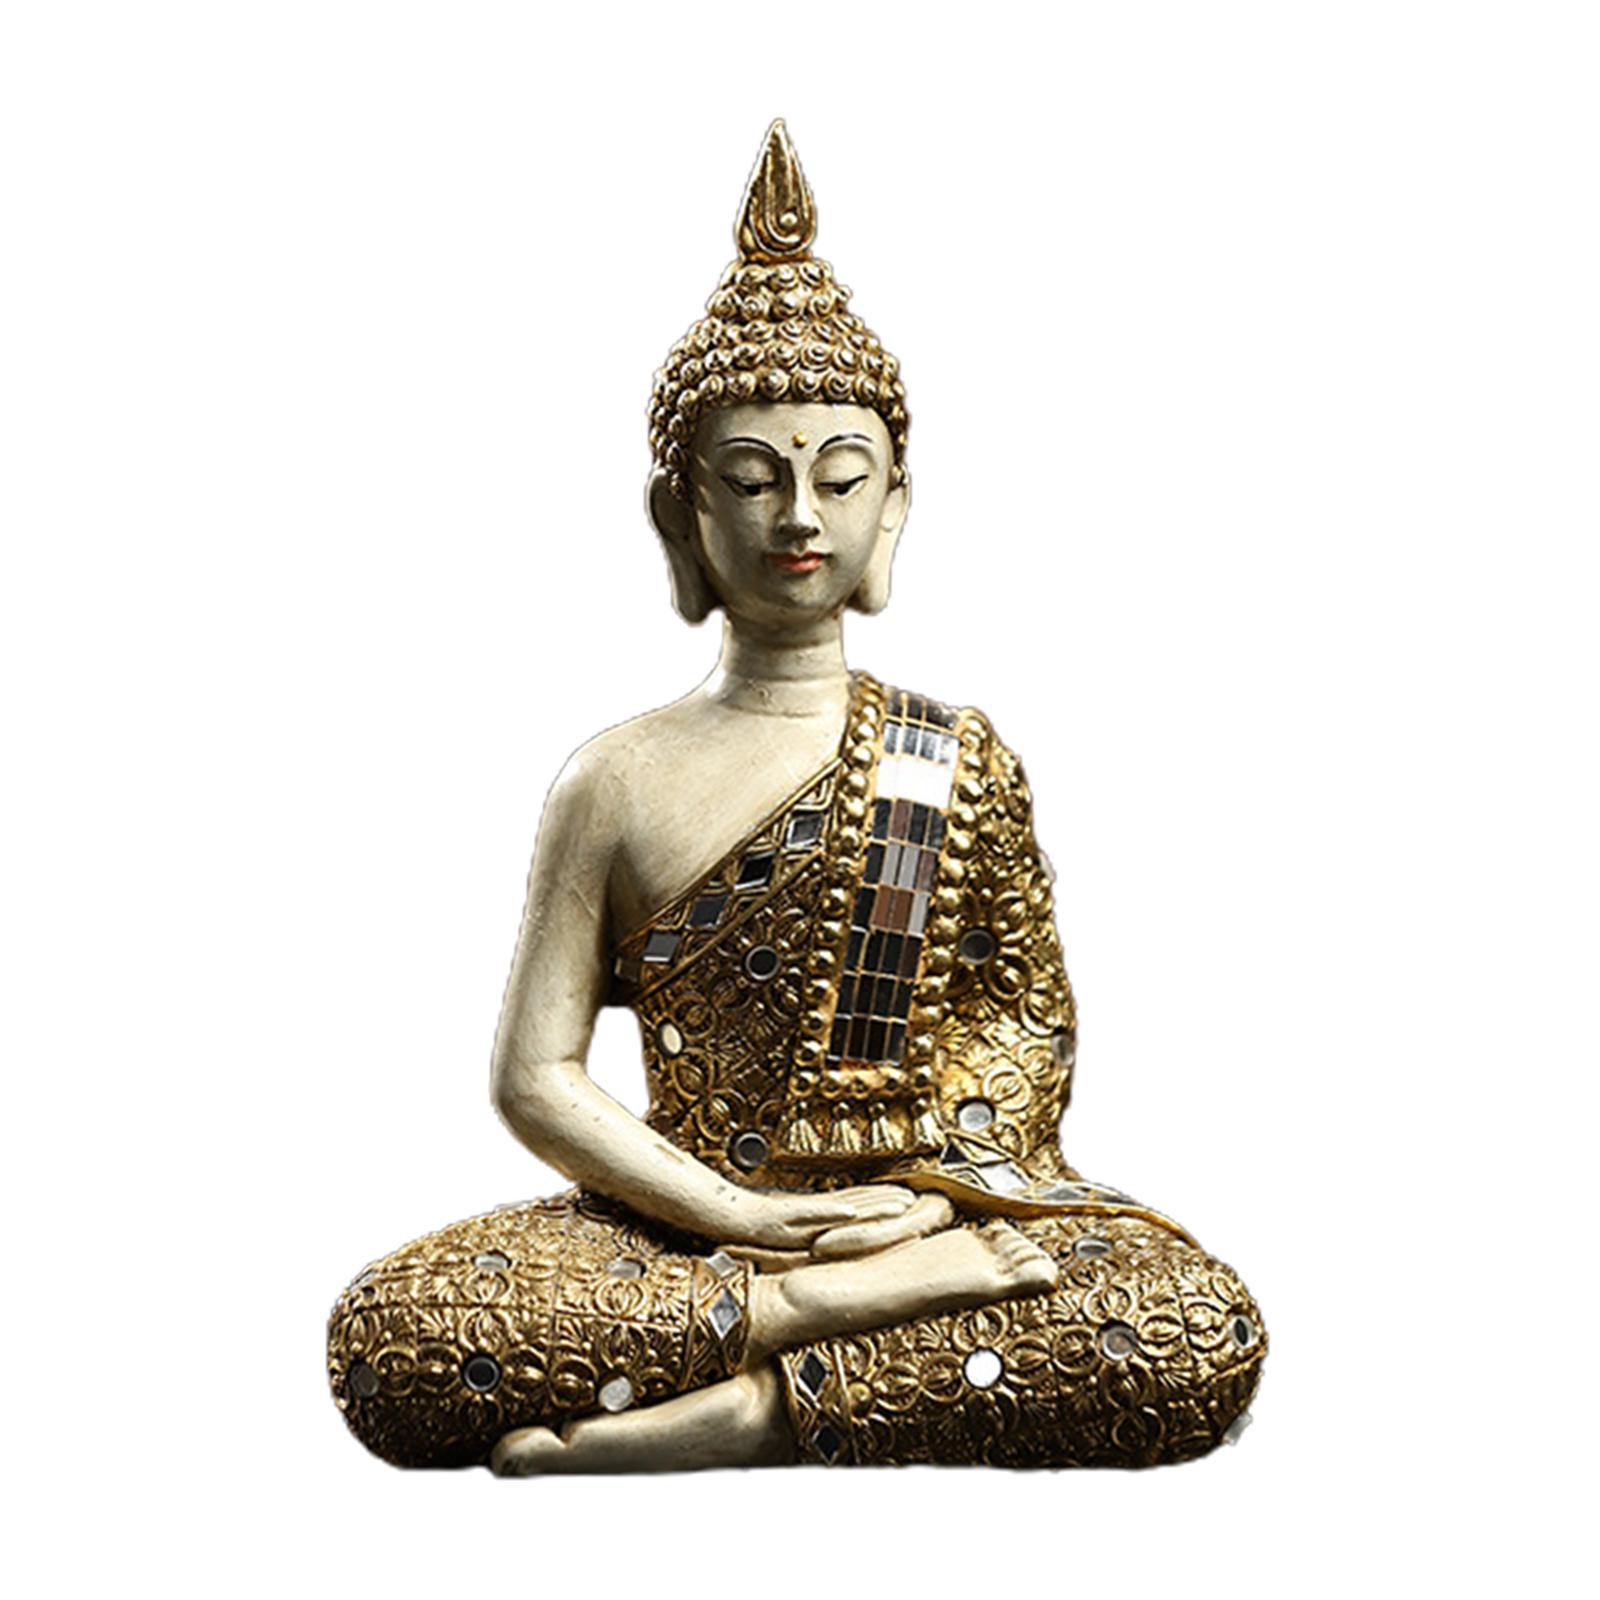 Sitting Buddha Statue Resin Figurine Handcrafted Decoration Collectibles StyleC